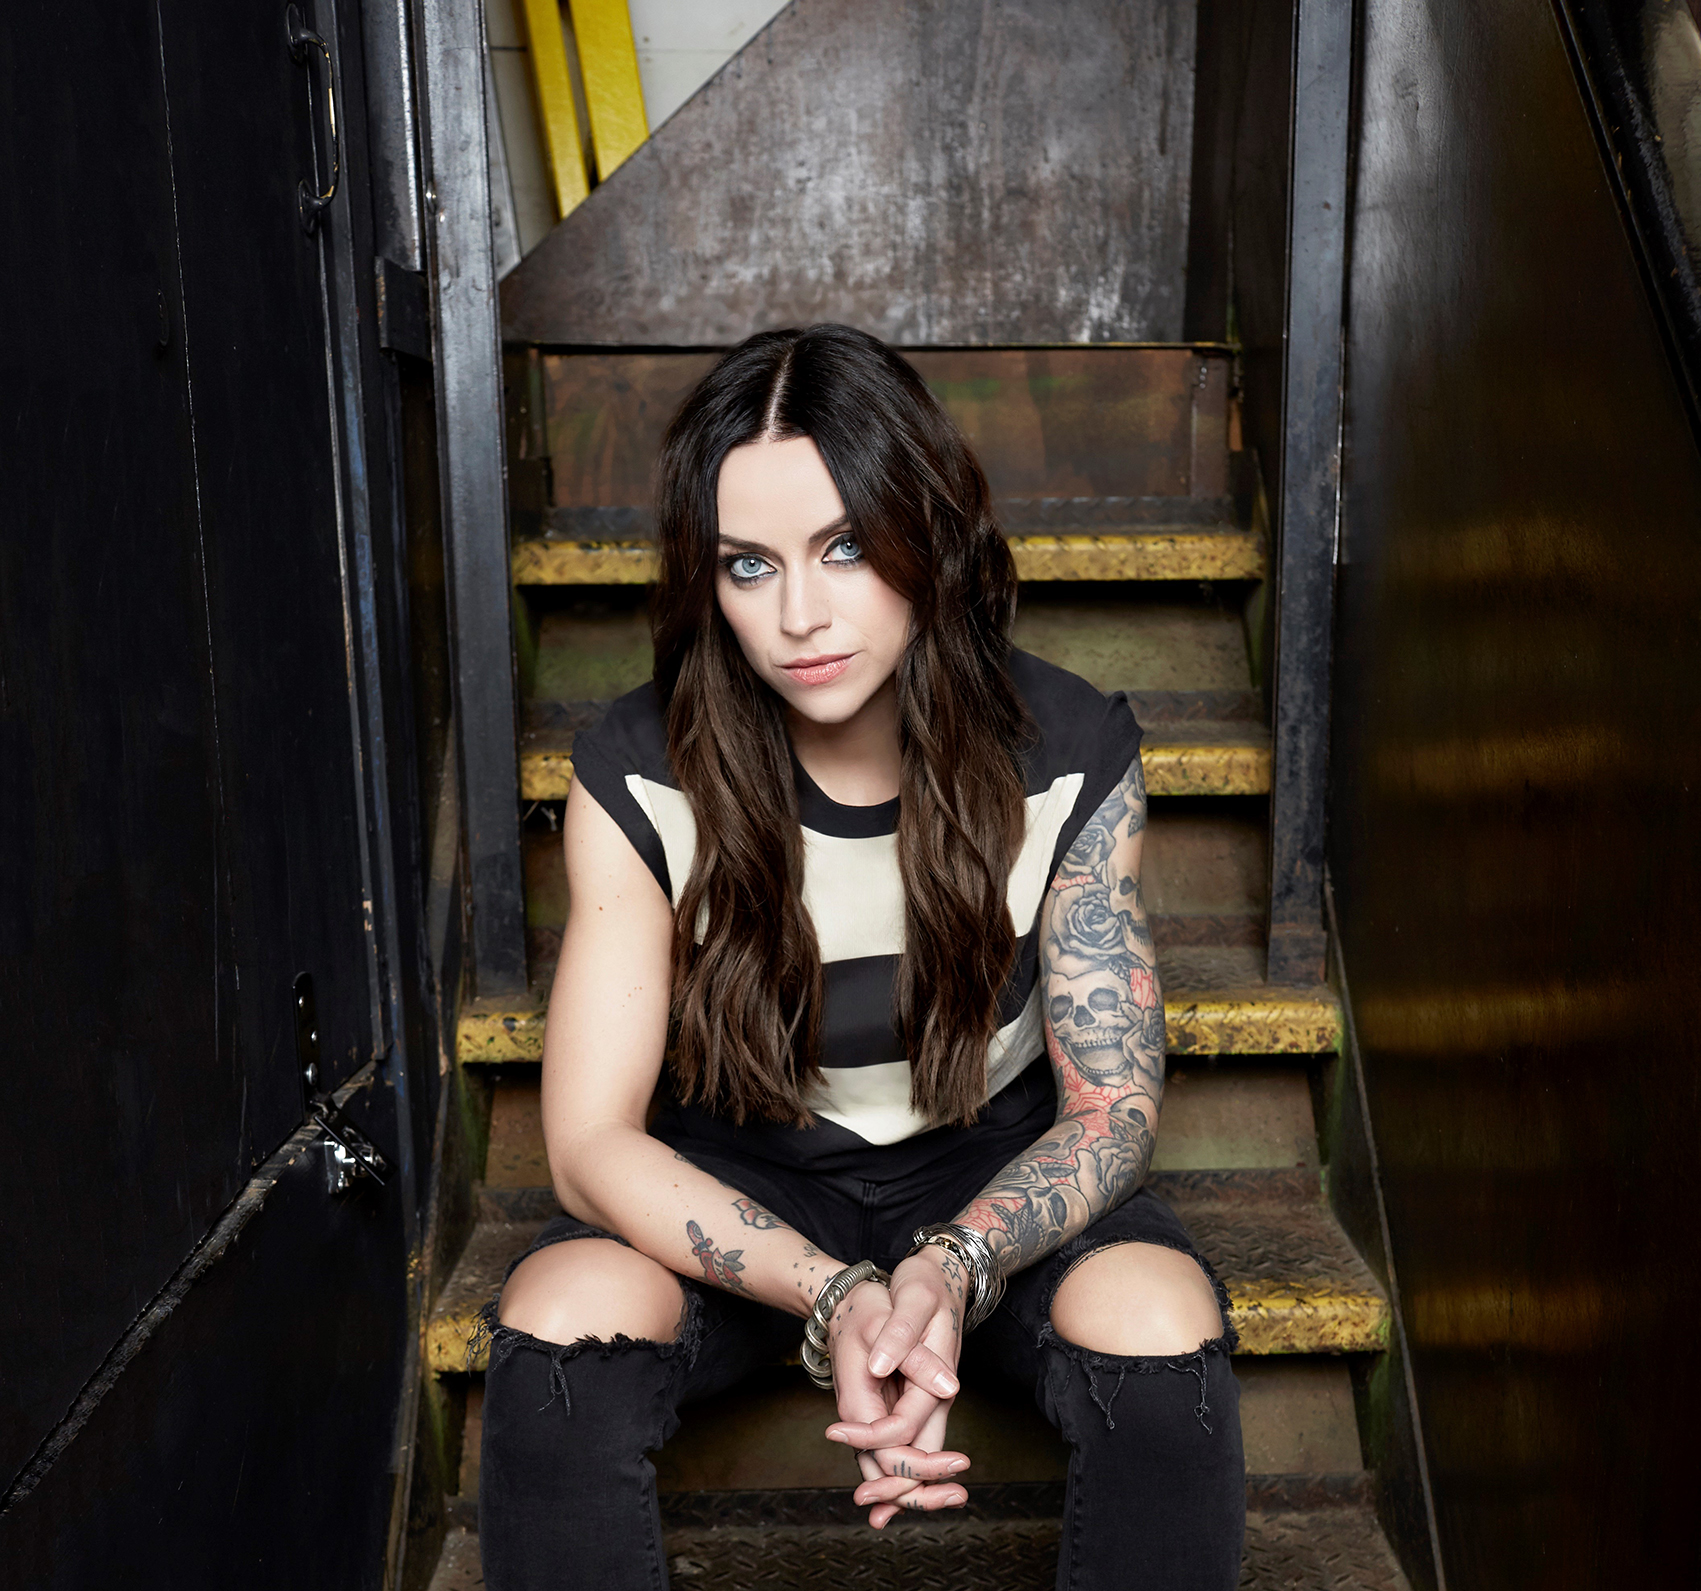 AMY MACDONALD announces major headline show at London's Roundhouse rescheduled to October 26th 